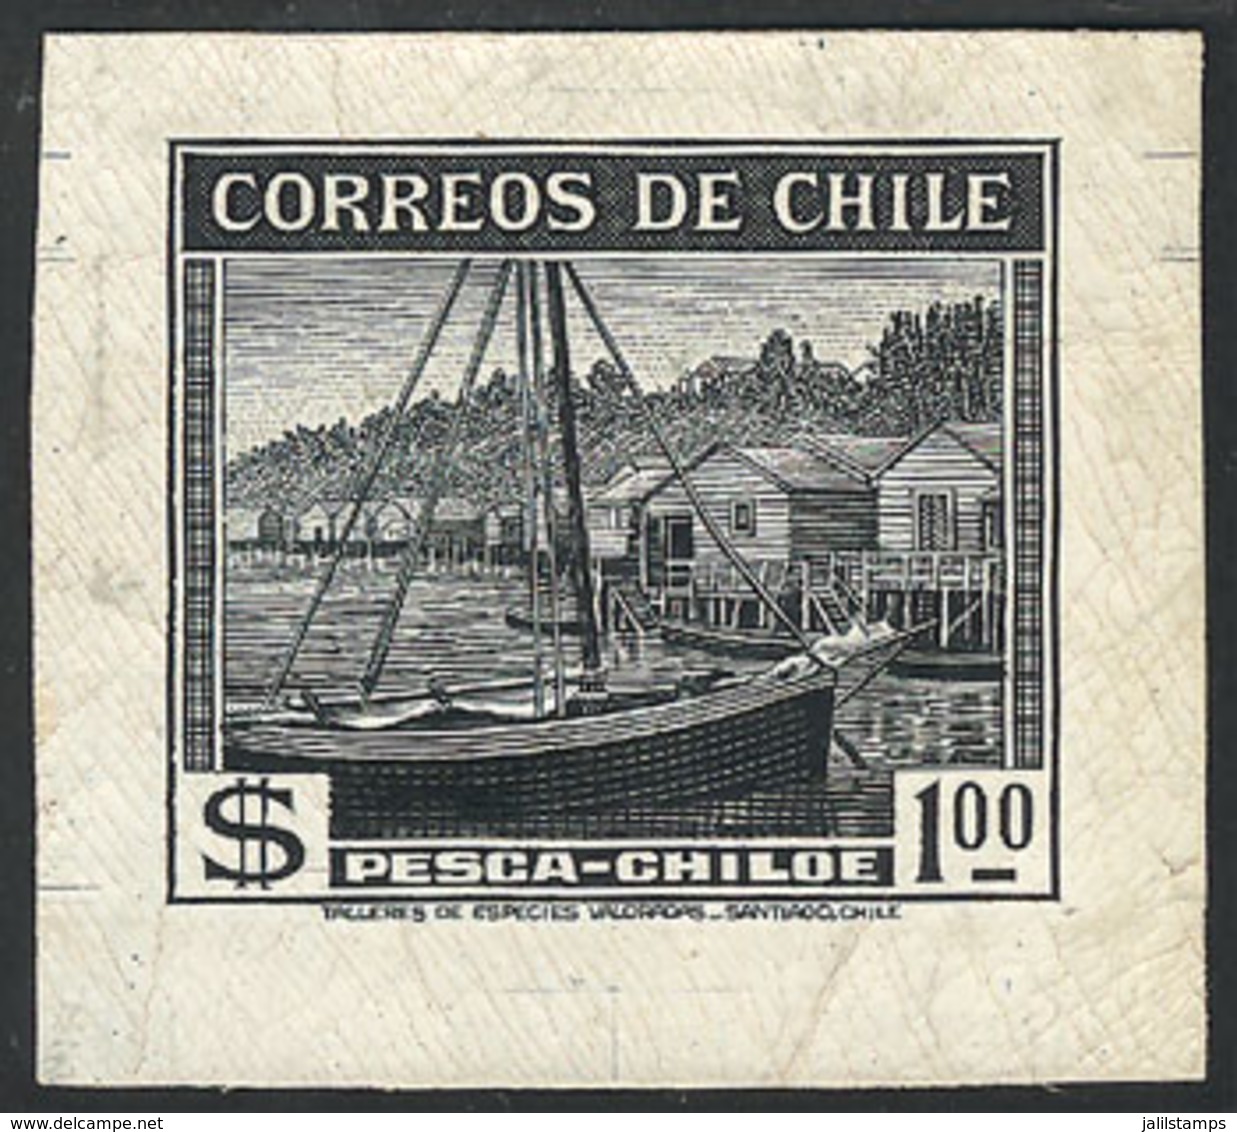 CHILE: Yvert 174, 1938/50 1P. Fishing, Chiloé (fishing Boat, Palafito - Stilt Houses), DIE PROOF In Black, VF Quality, R - Chili